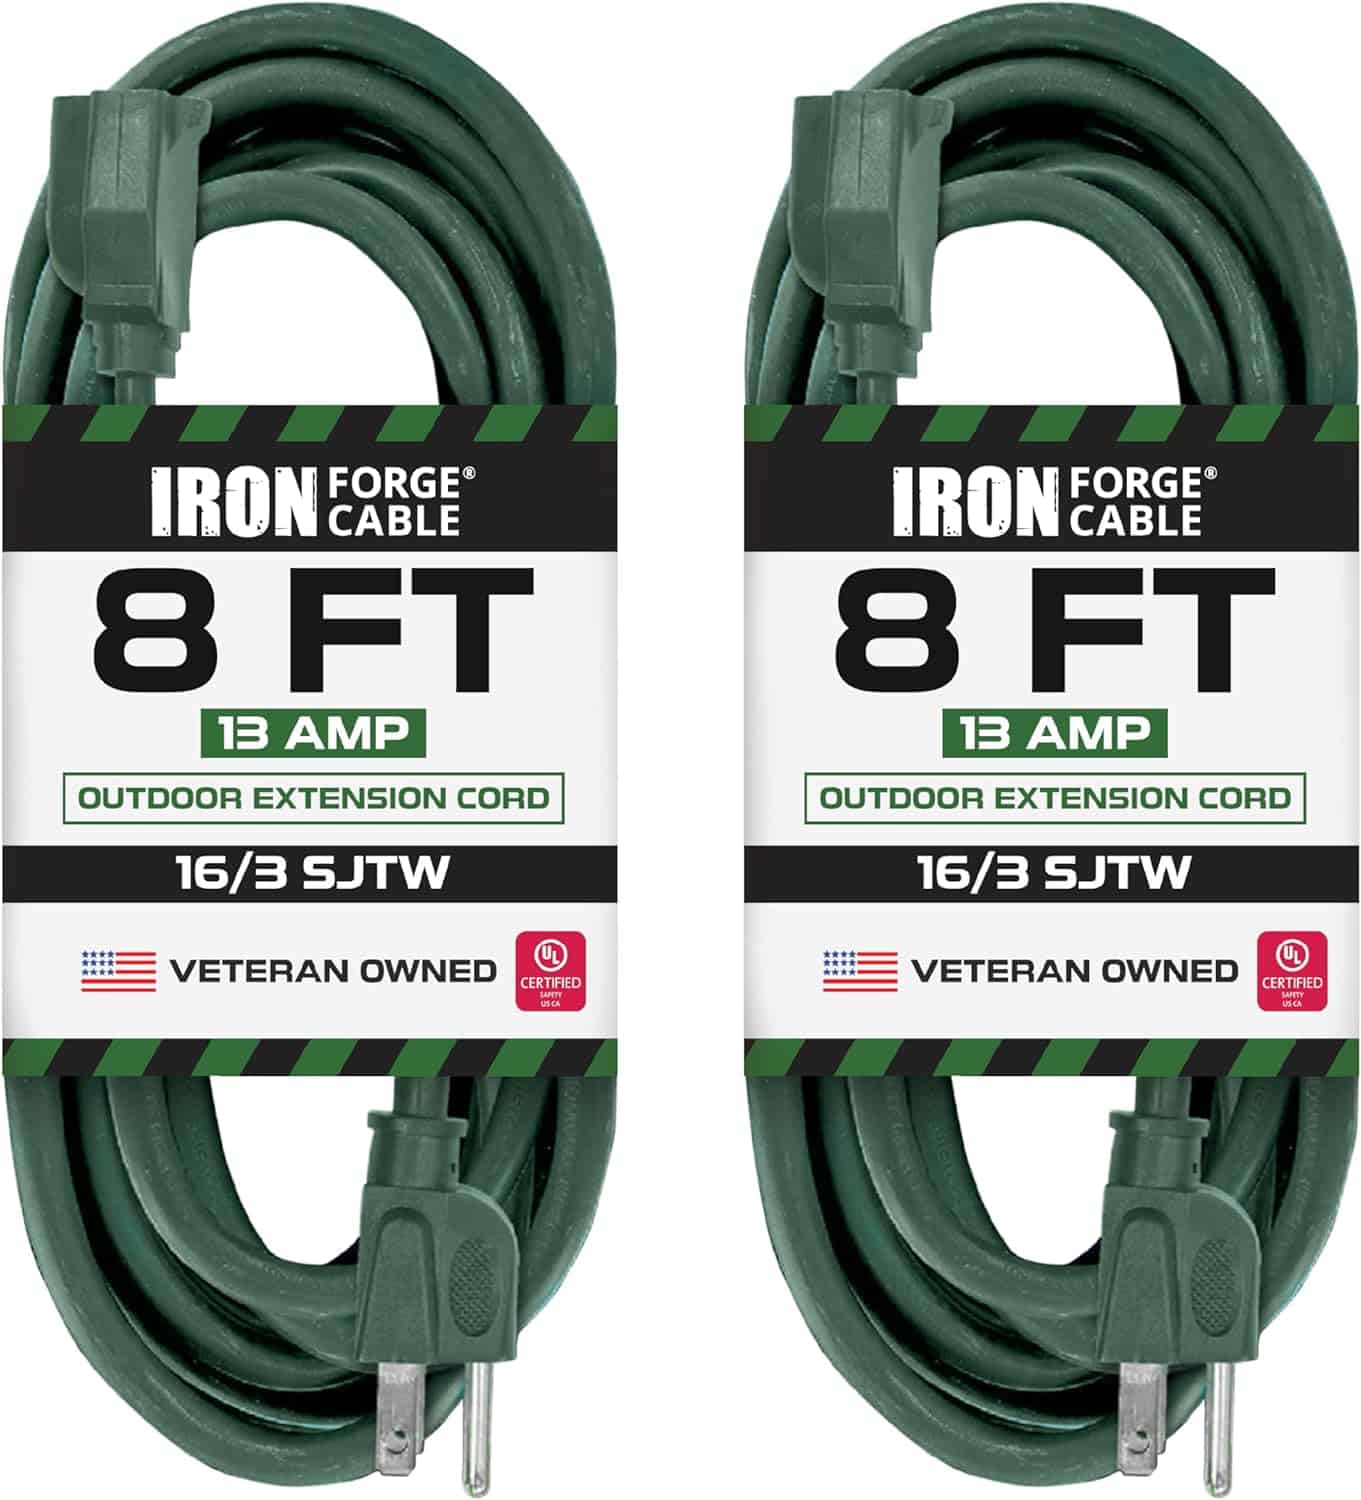 Irong Forge Cable 8 Foot Green Outdoor Extension Cord 2 Pack, 16 3, Indoor Outdoor Use, 3 Prong, Weatherproof Exterior, Great for Garden, Landscaping, 1